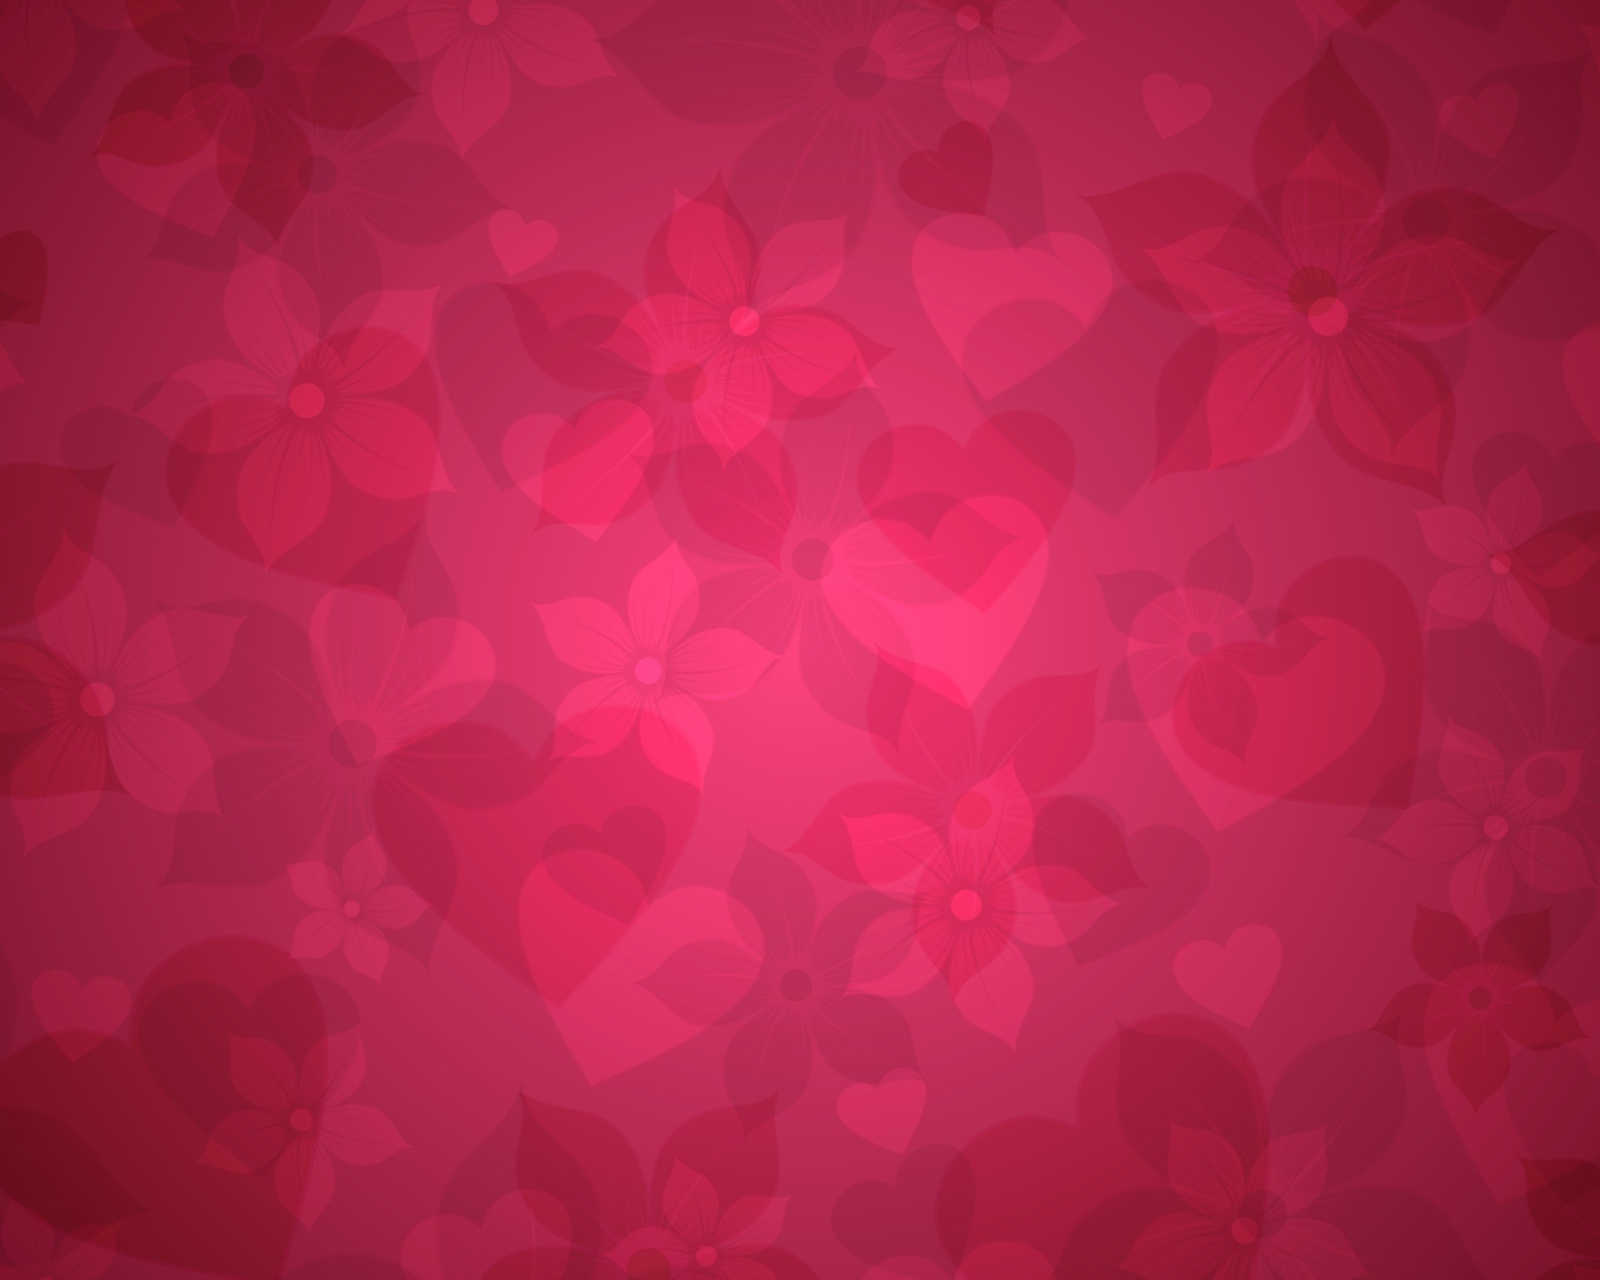 Pink Hearts And Flowers Pattern wallpaper 1600x1280